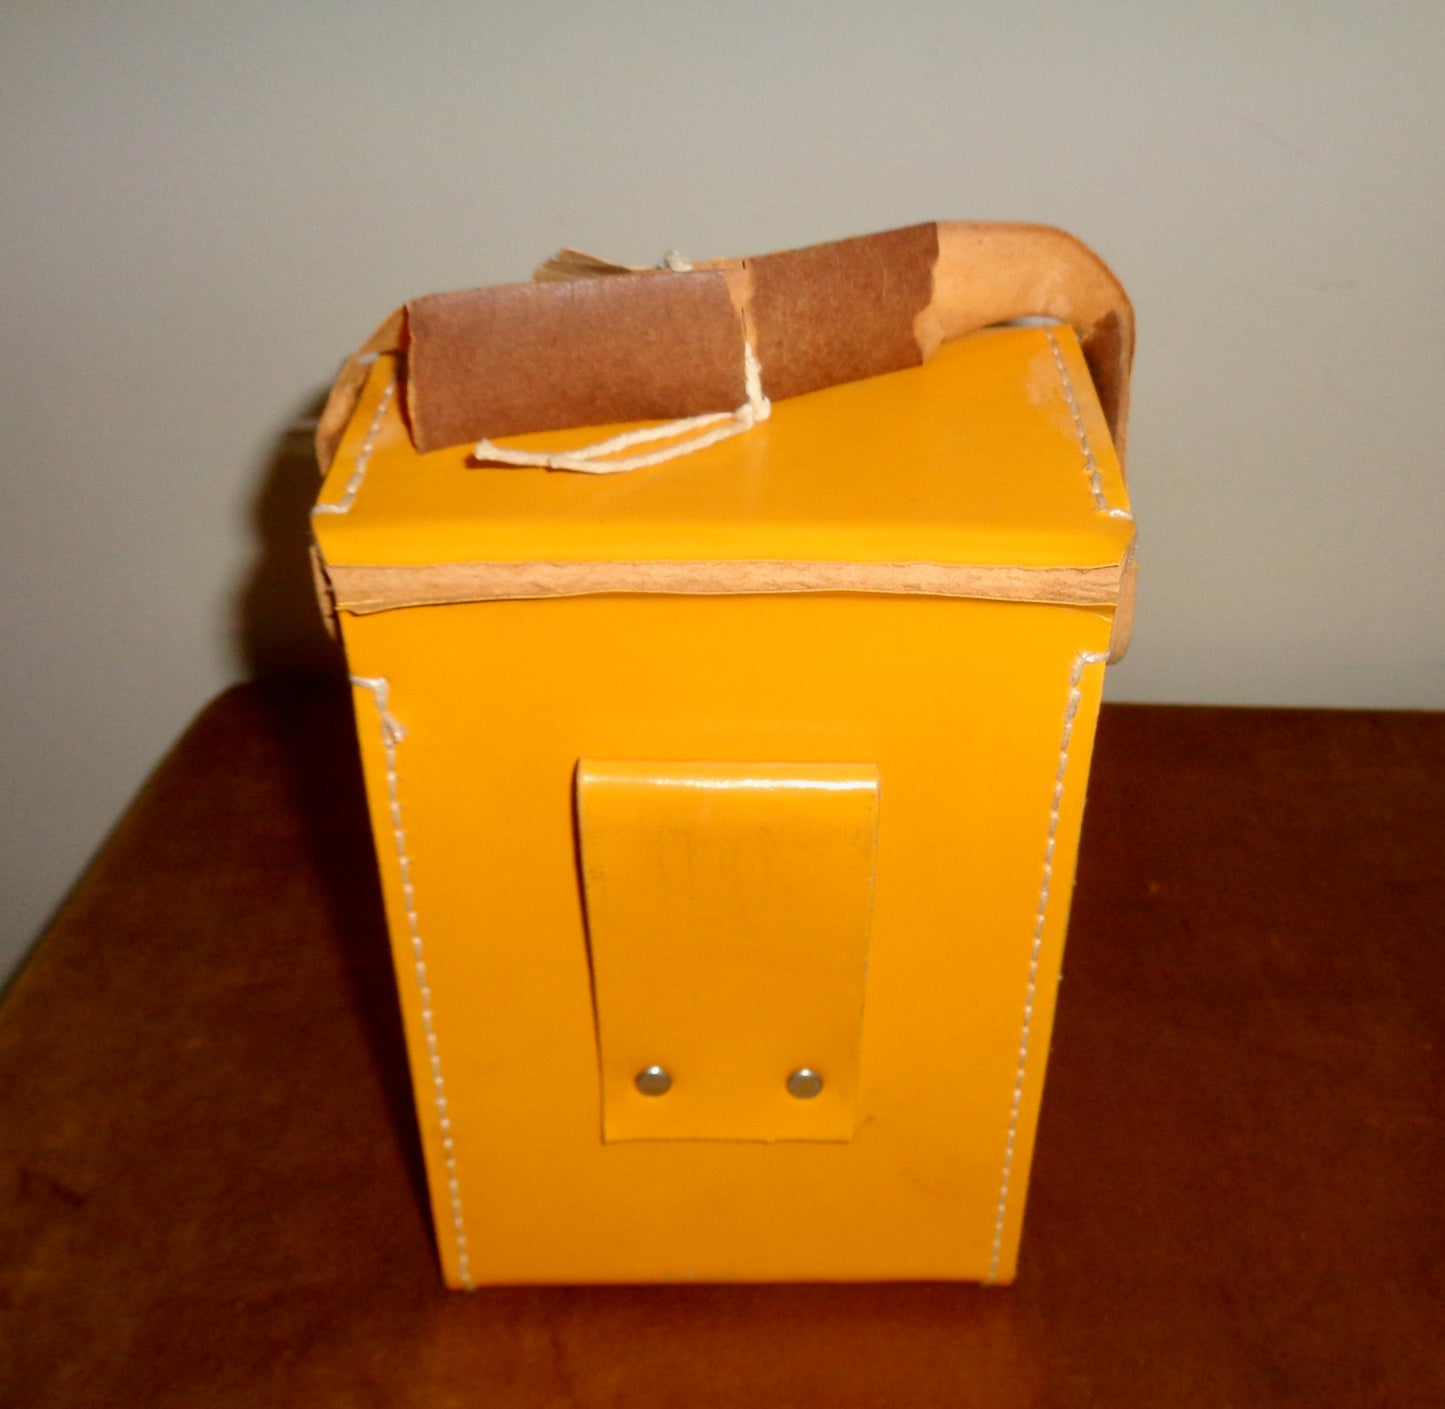 1970s AM5000 Air Flow Developments (AD) Anemometer in Its Original Yellow Leather Case